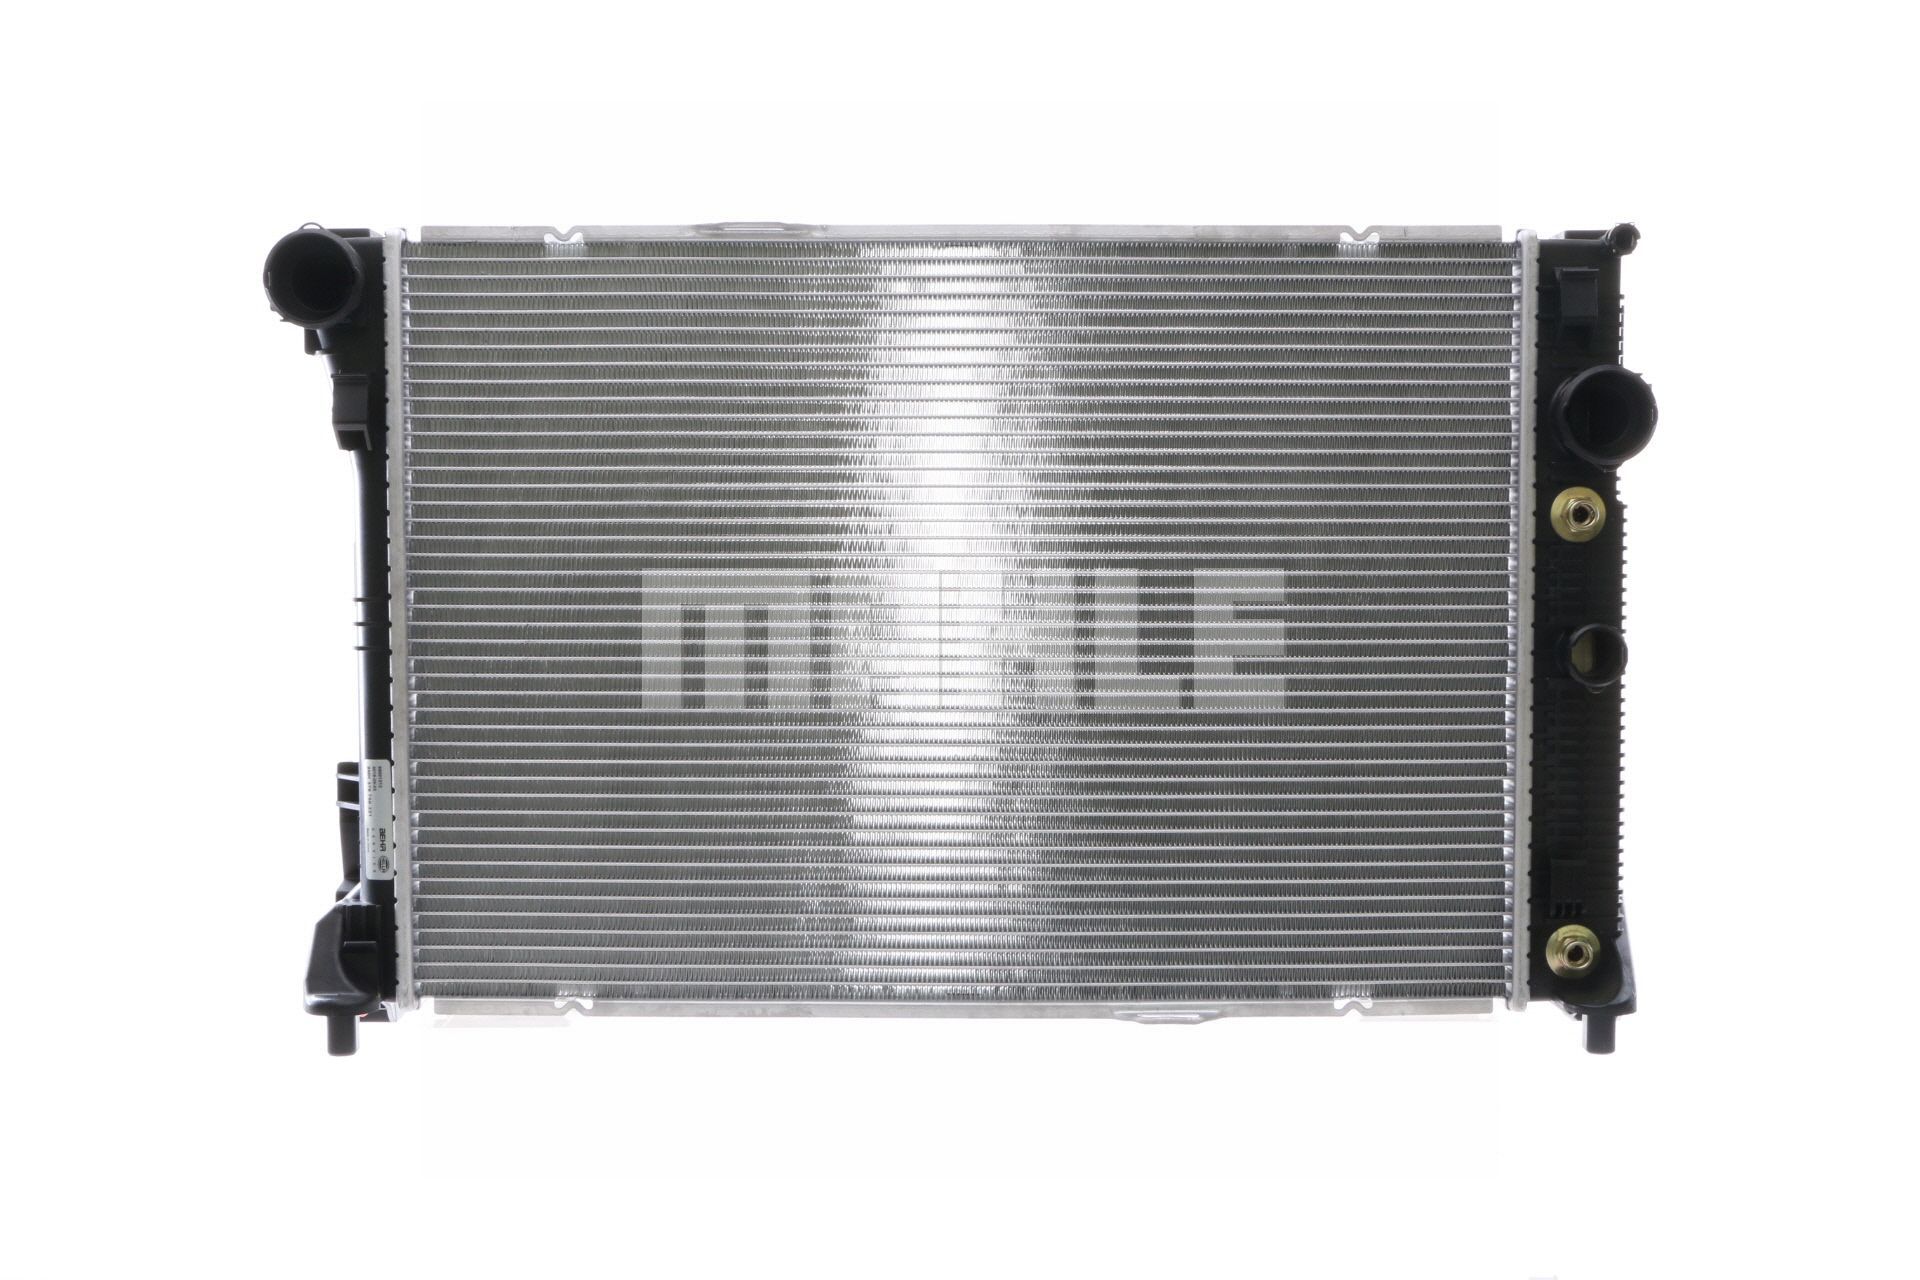 MAHLE ORIGINAL CR 1176 000S Engine radiator for vehicles with/without air conditioning, 640 x 440 x 33 mm, Brazed cooling fins